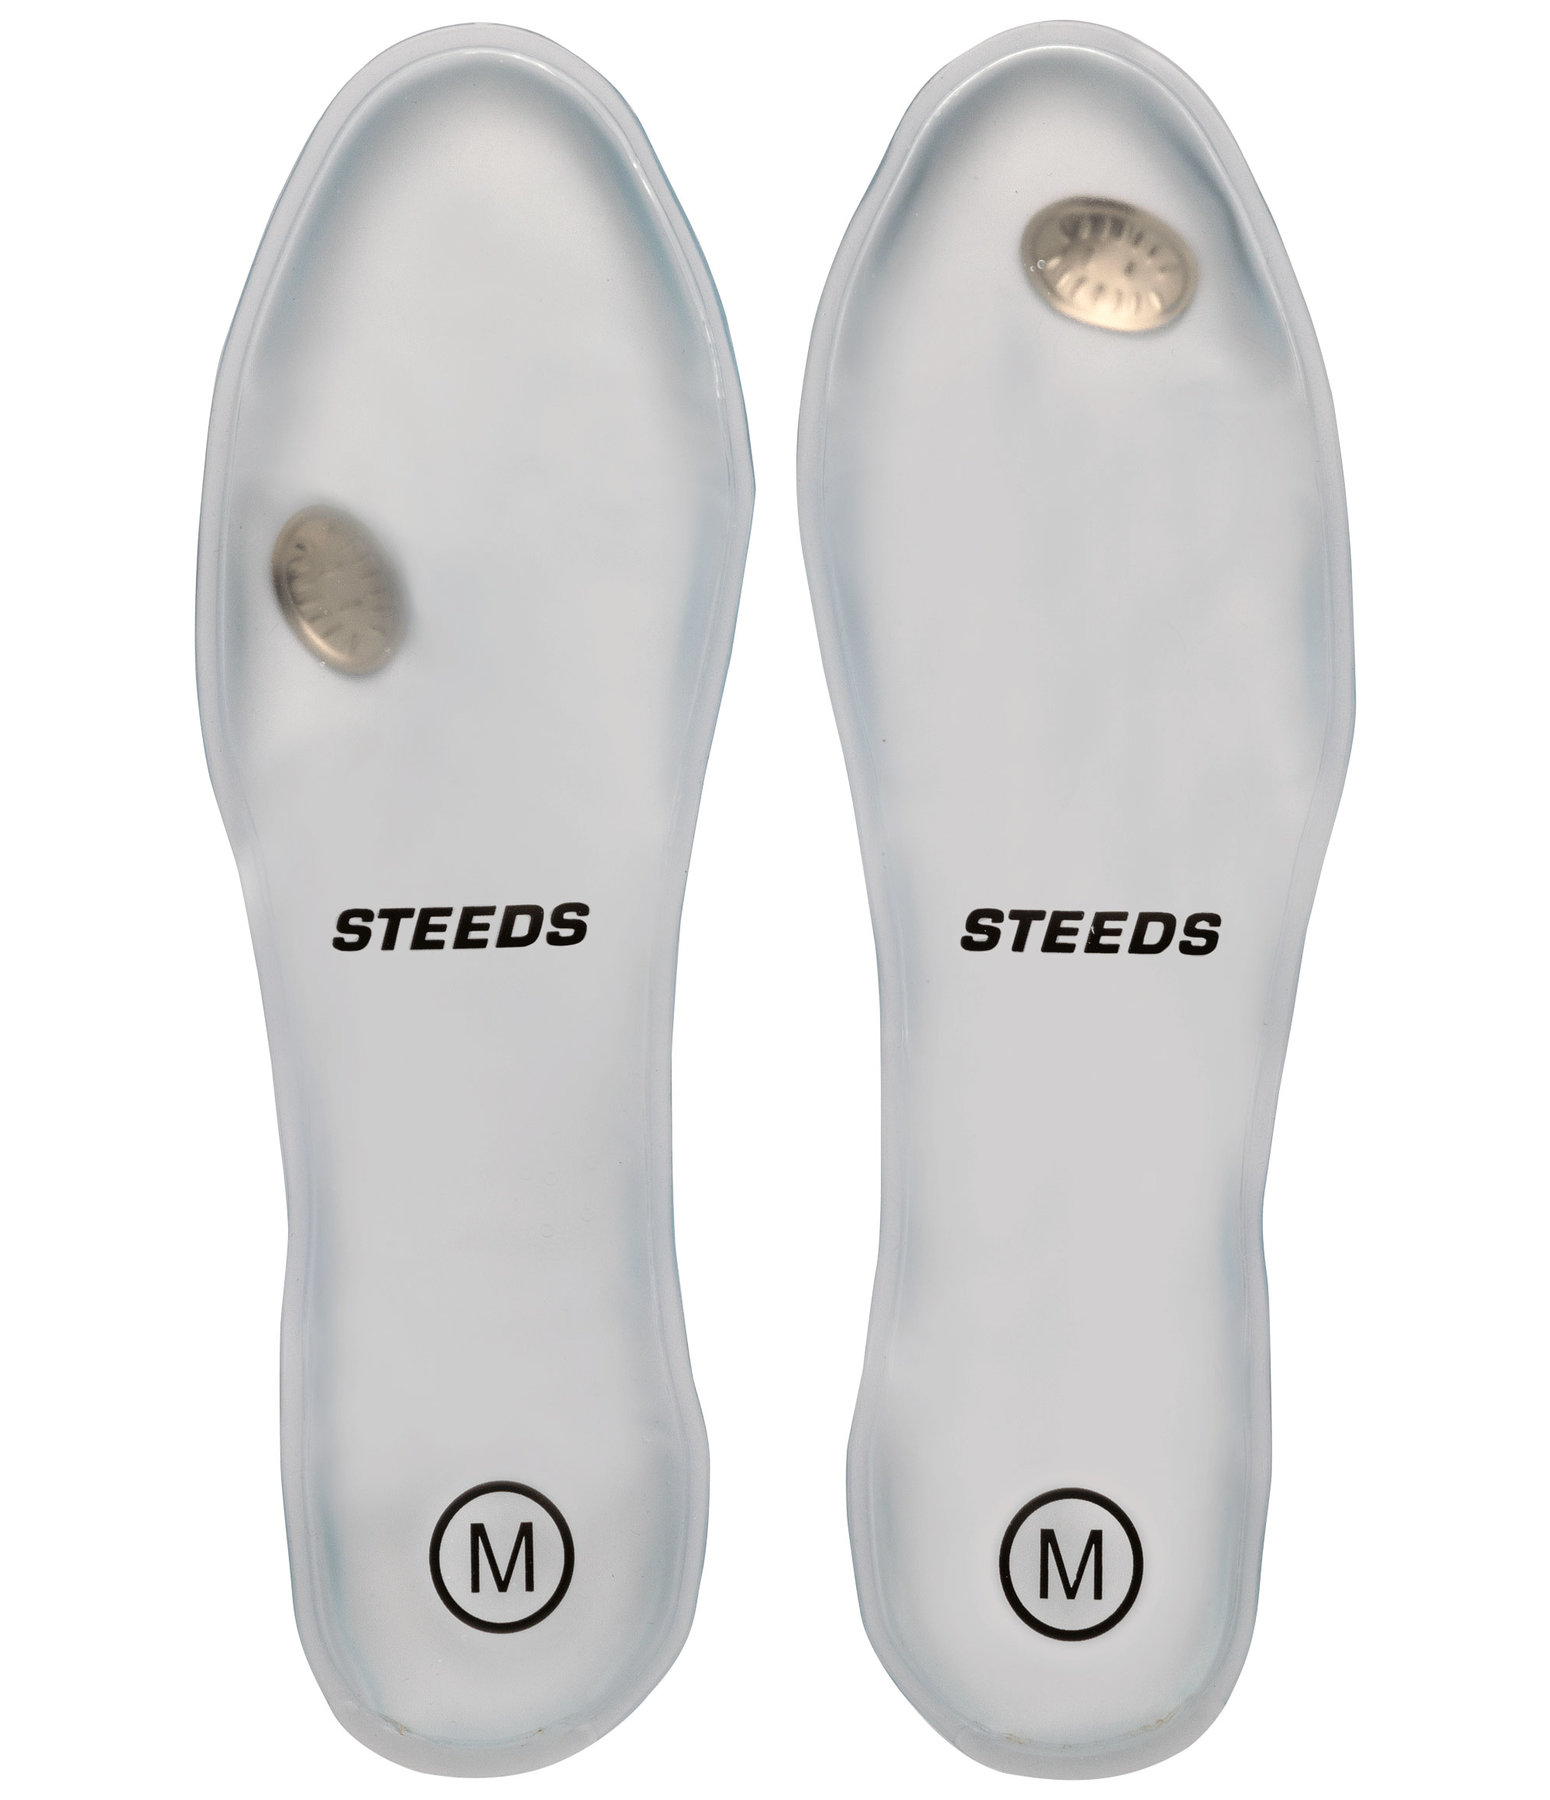 Reusable Heating Insoles